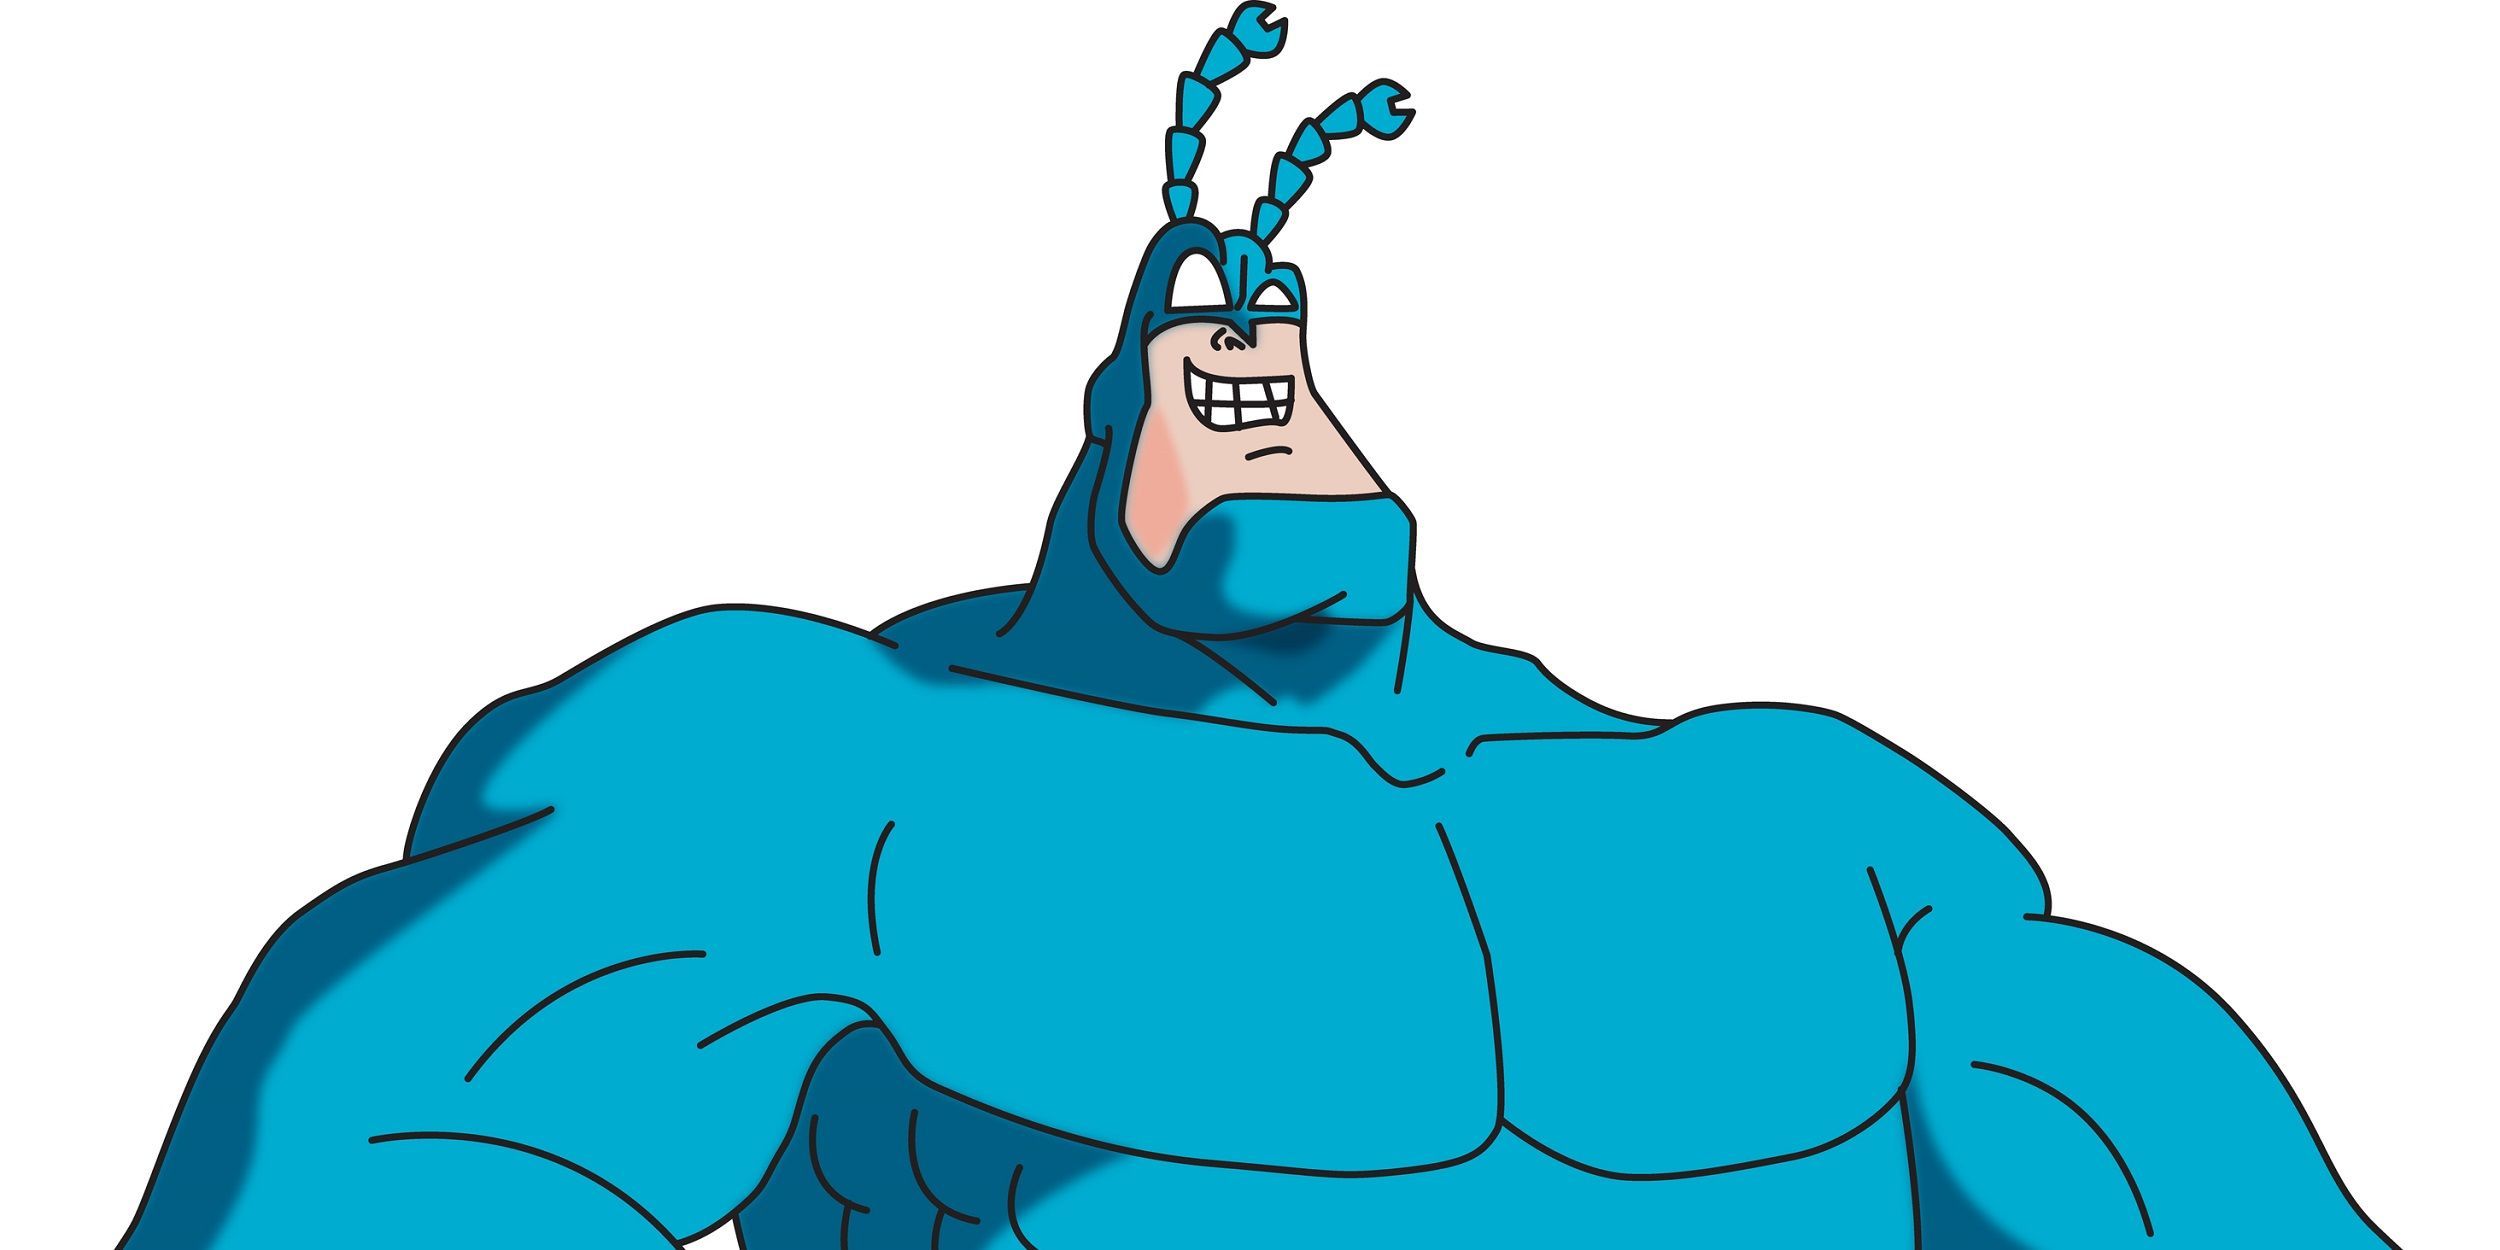 How Does The Tick Measure Up to His Own Legacy